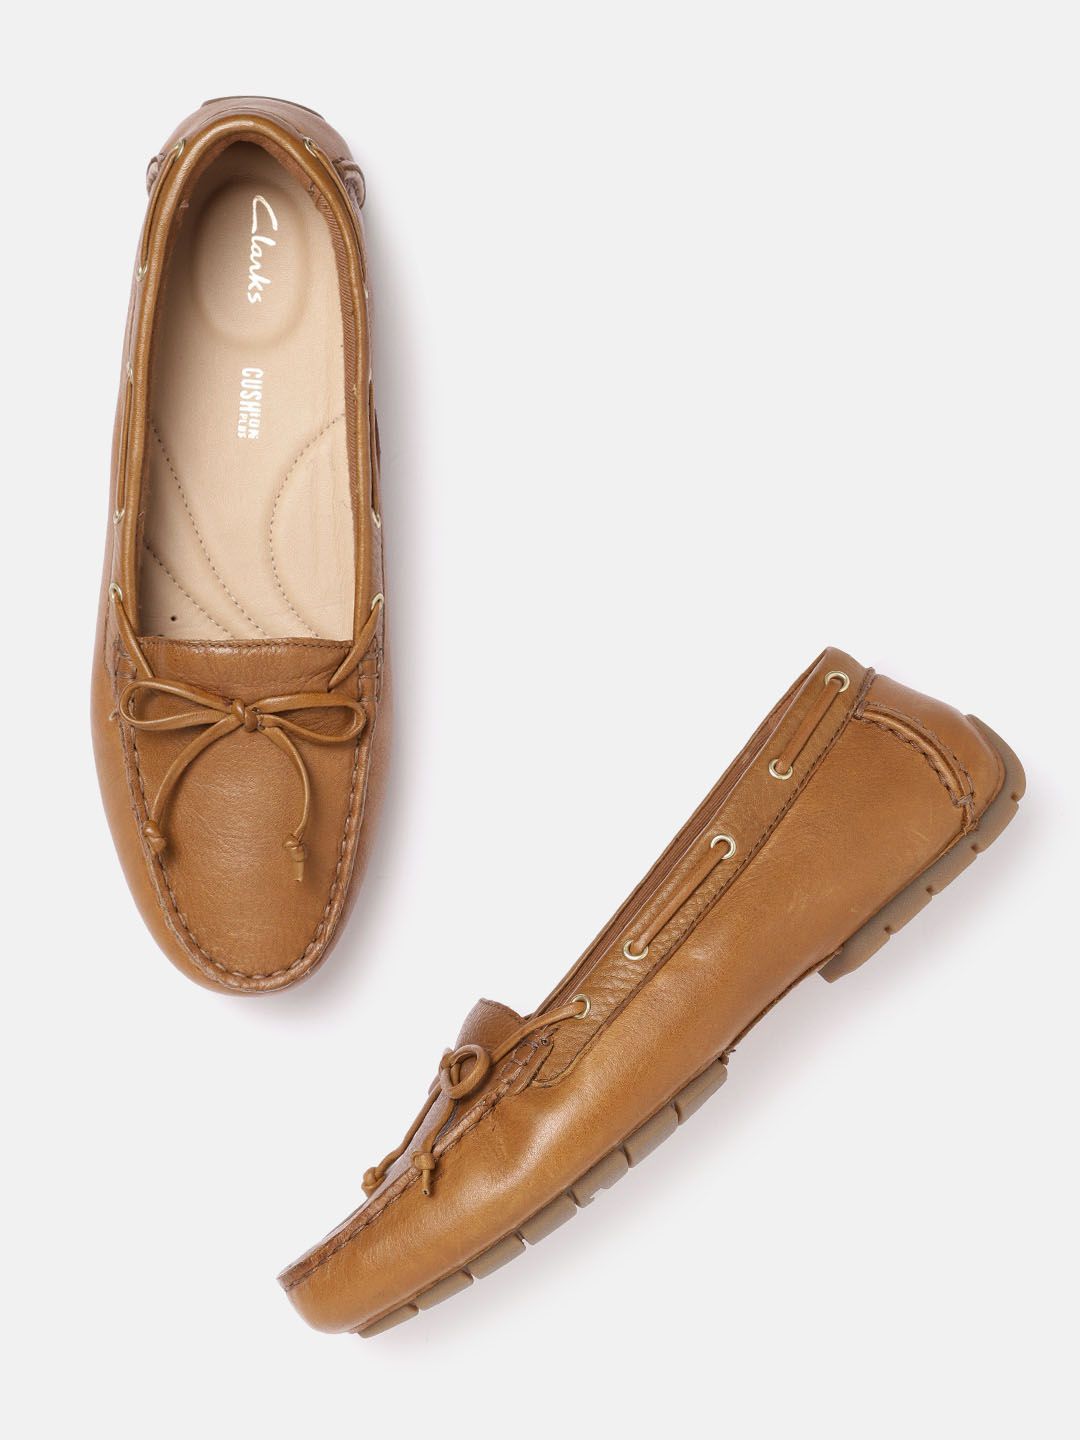 Clarks Women Tan Brown Solid Leather Driver Boat Shoes with Bows Price in India